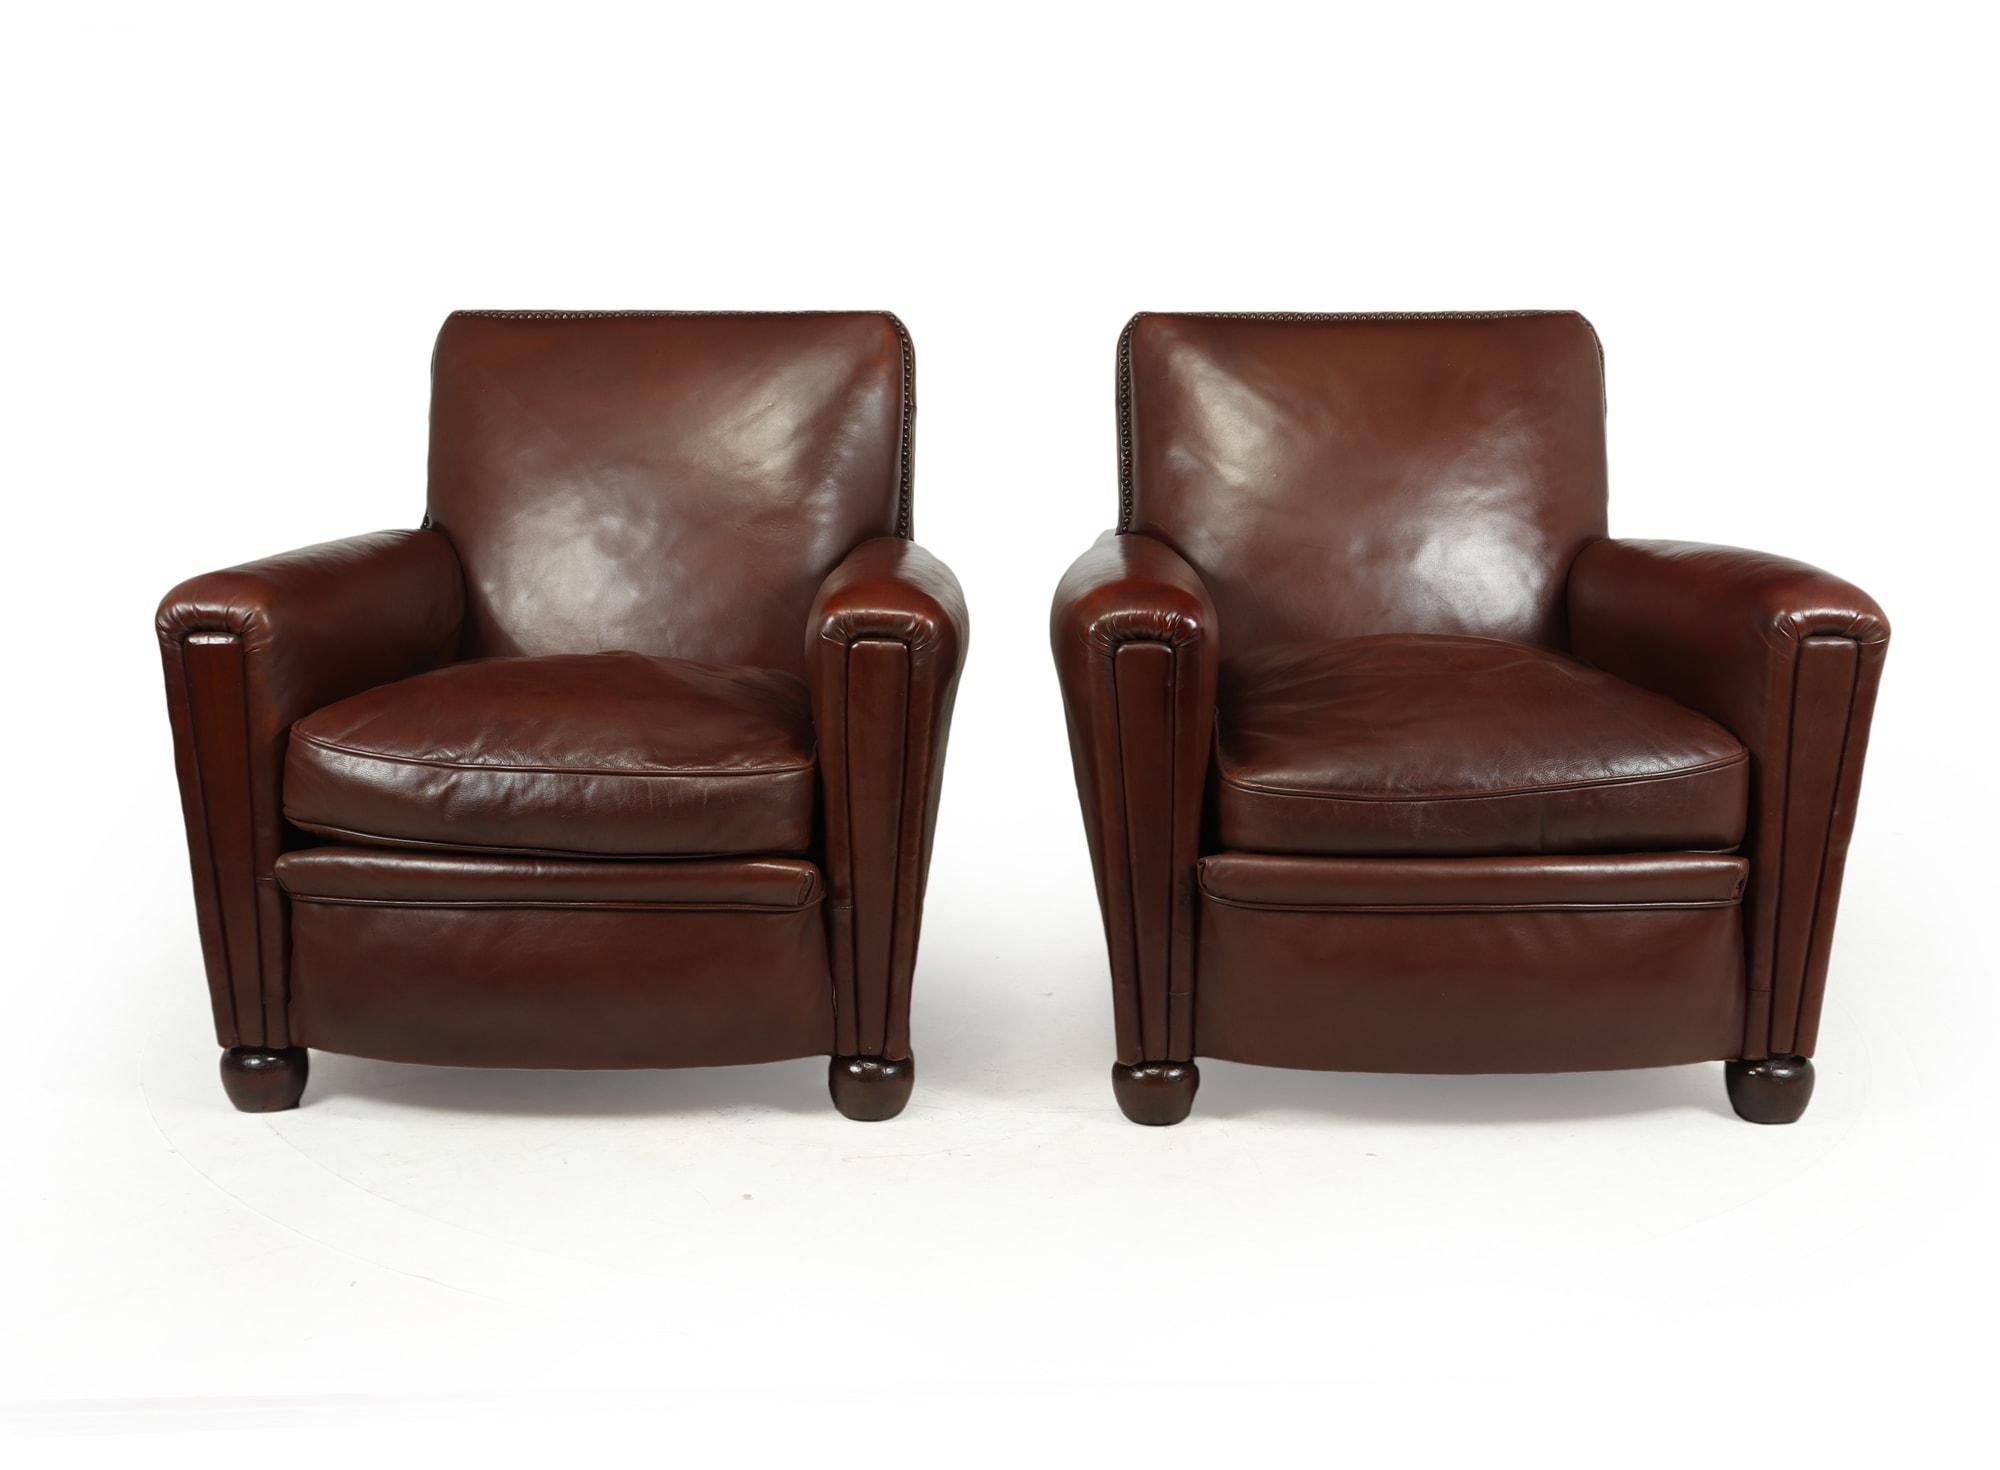 Pair of French leather club chairs, c1940
An extremely well looked after and preserved pair of leather club chairs produced in France in the 1940’s, the original leather has a warm chestnut colour and is in excellent supple condition, it has one